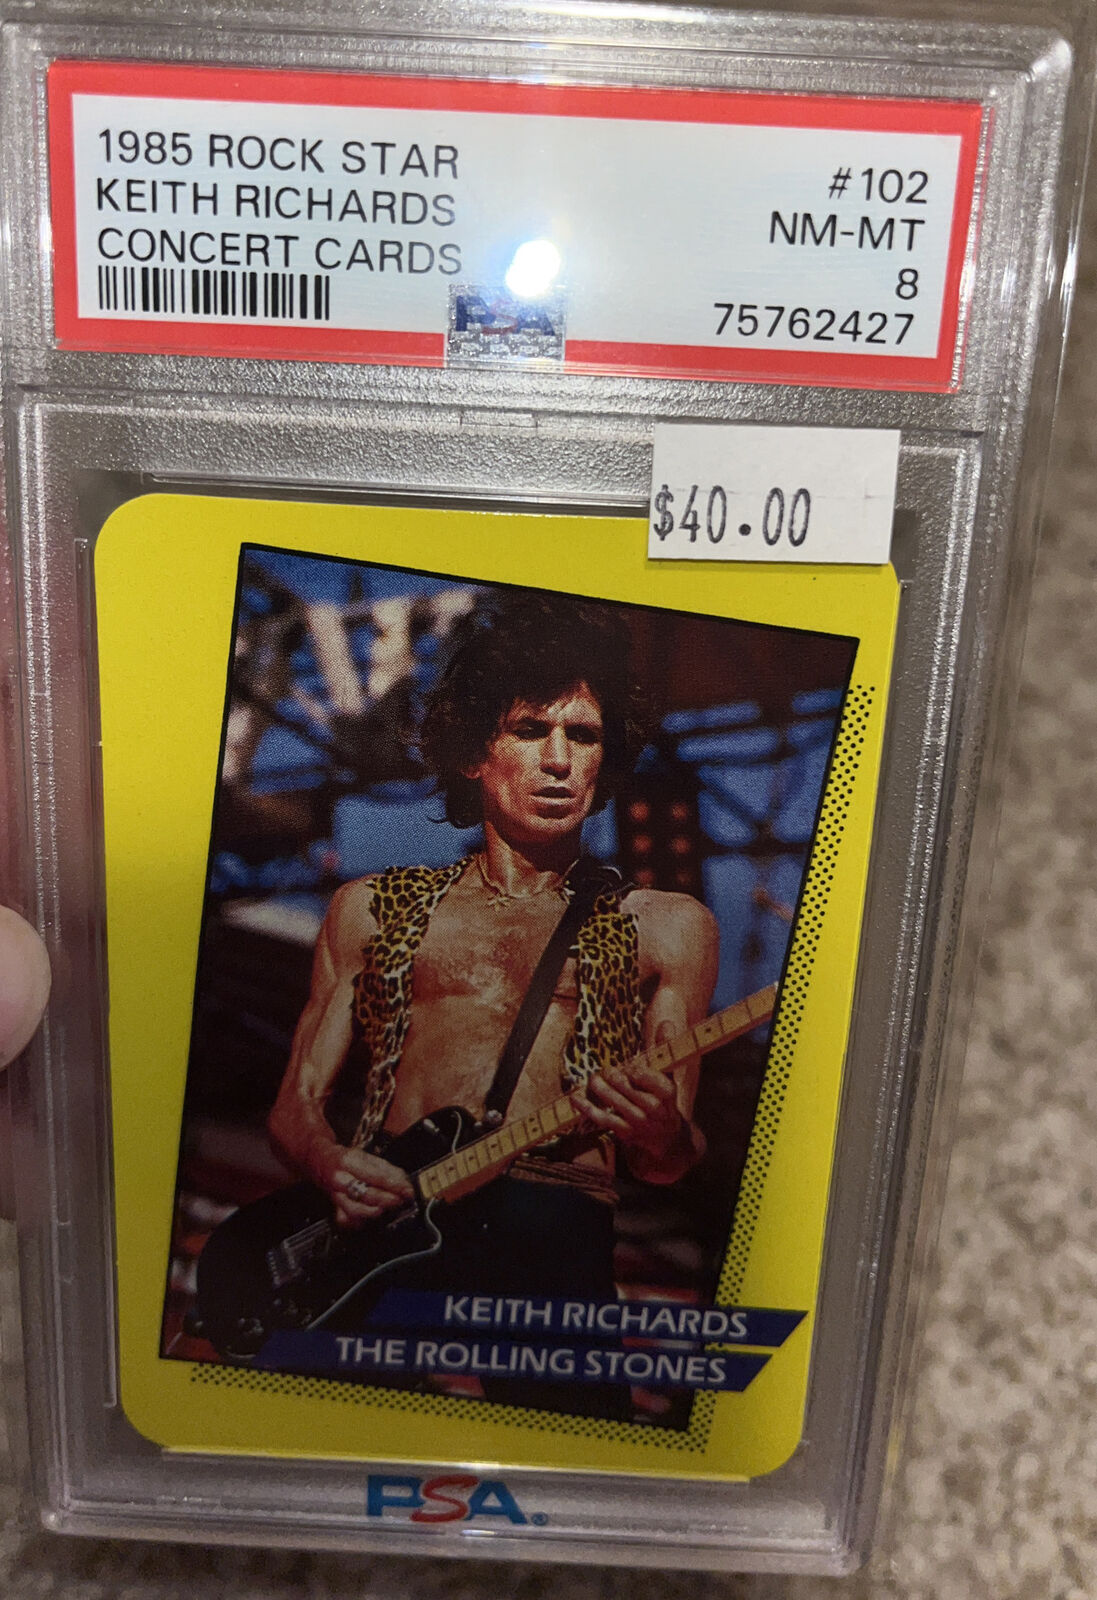 1985 Rock Star KEITH RICHARDS, THE ROLLING STONES Concert Cards #102 PSA 8 NM-MT